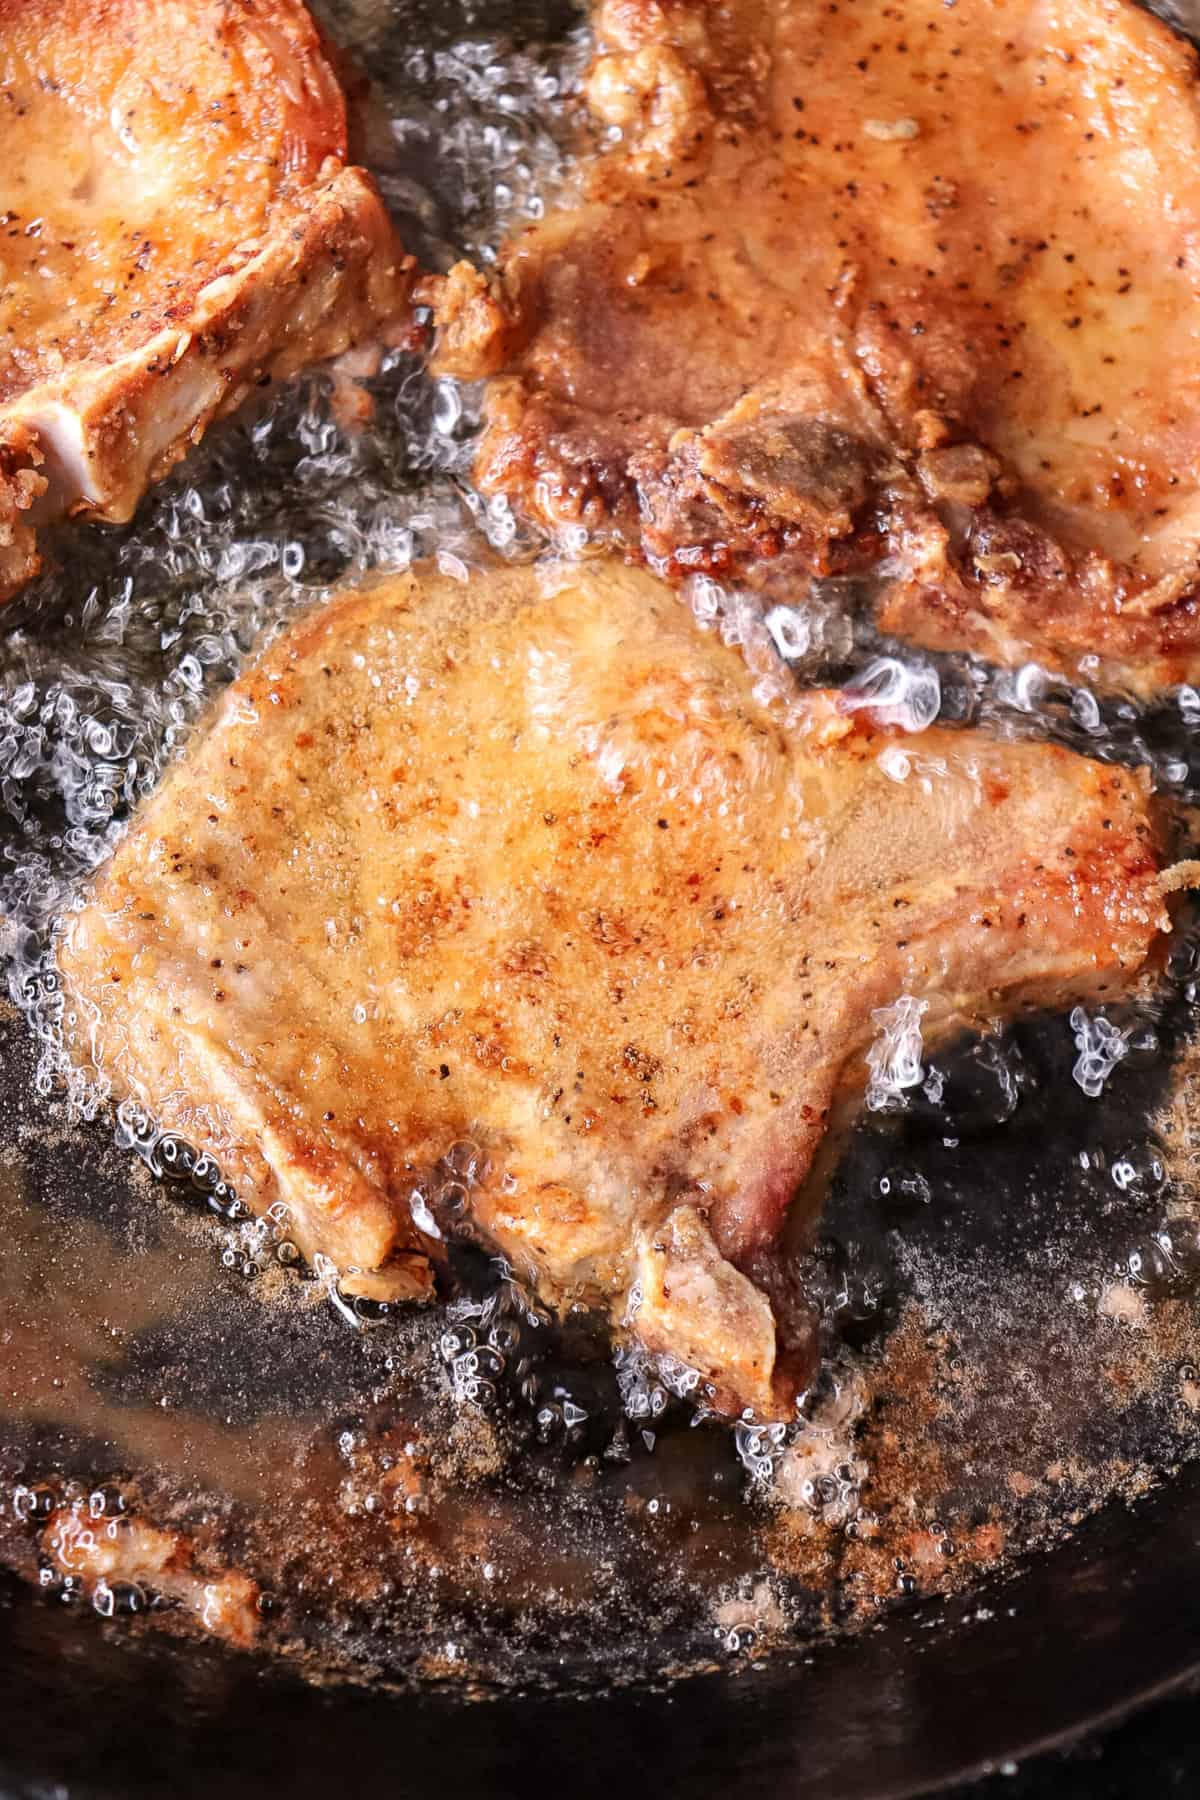 pork chops are frying in vegetable oil with bubbles visible from the frying process